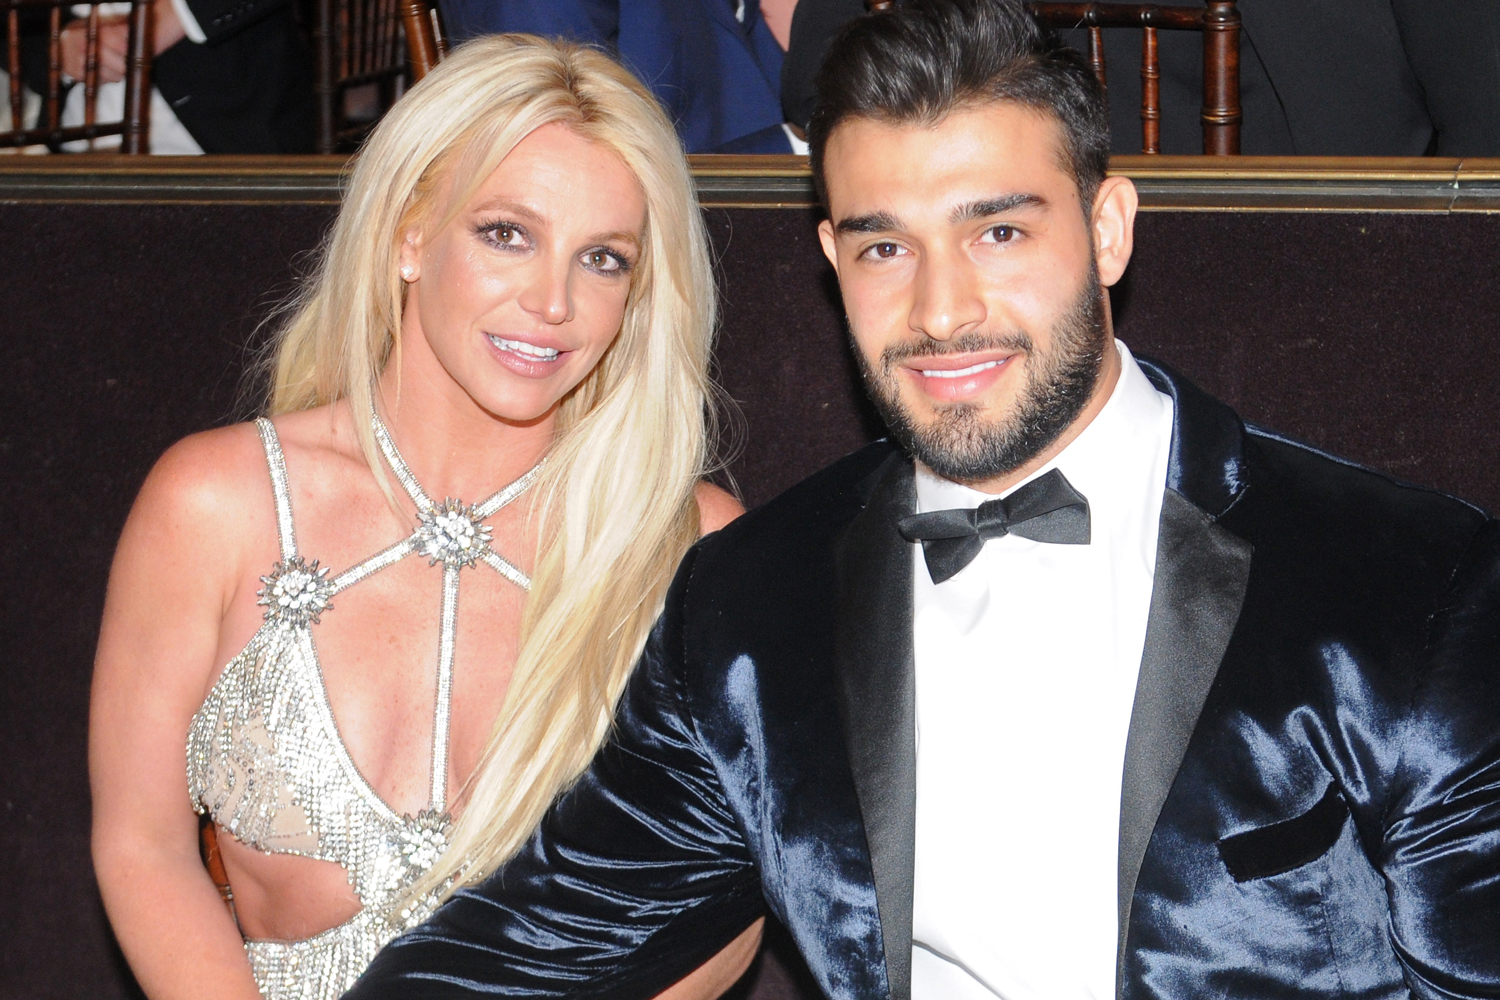 Fans suspect Britney Spears married to fiancé Sam Asghari earlier this month.